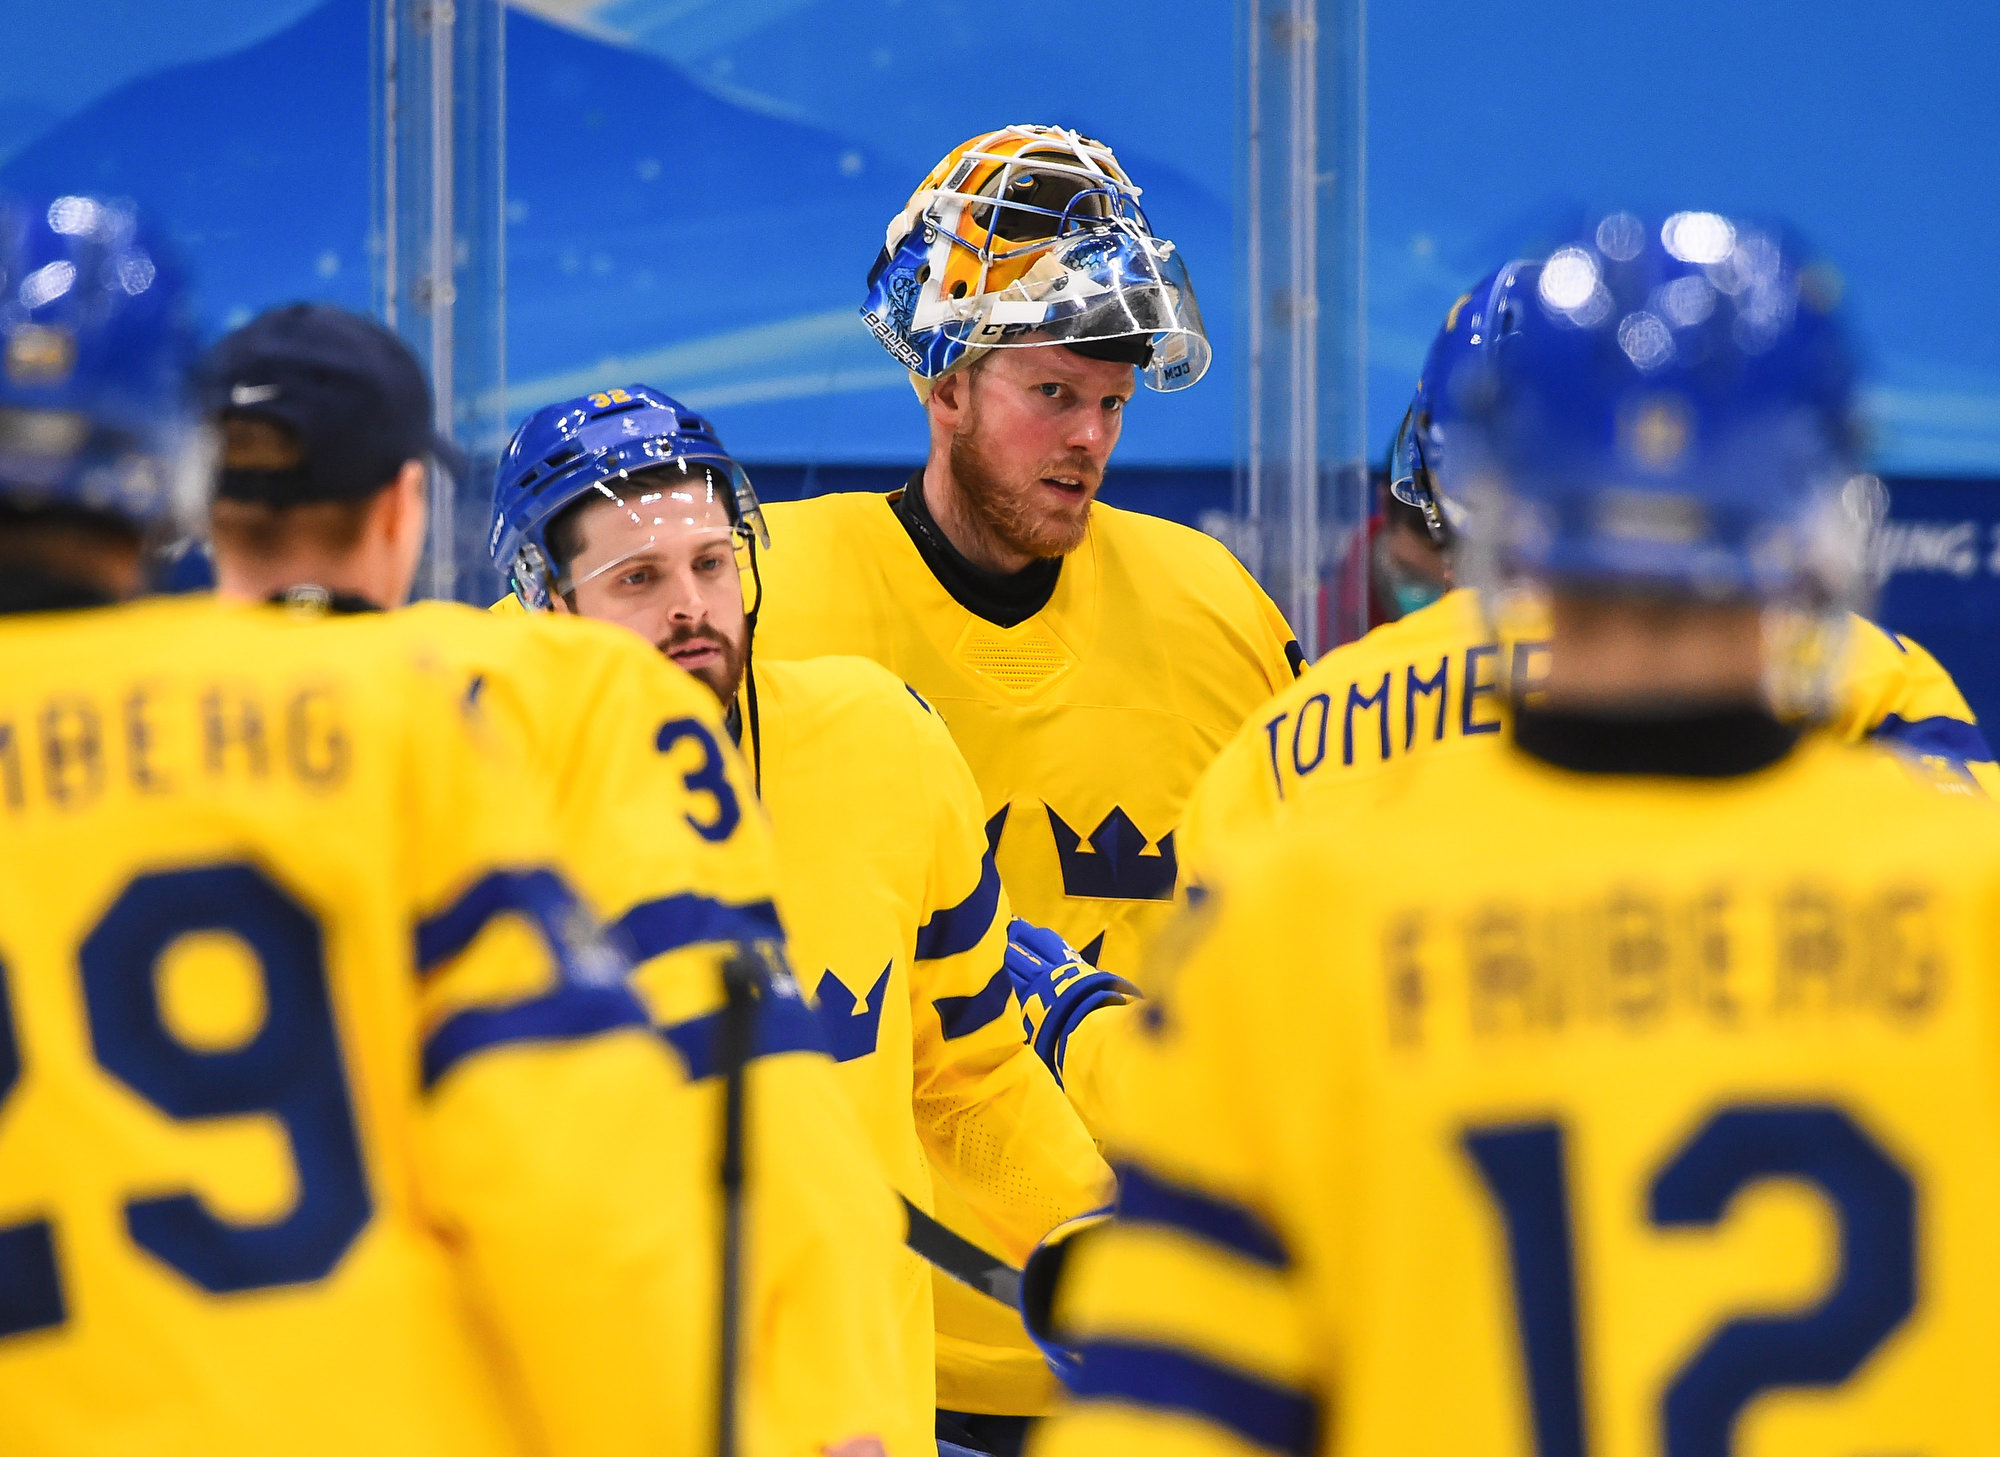 Redesigning Denmark, Sweden and Finland's 2022 Olympic Hockey